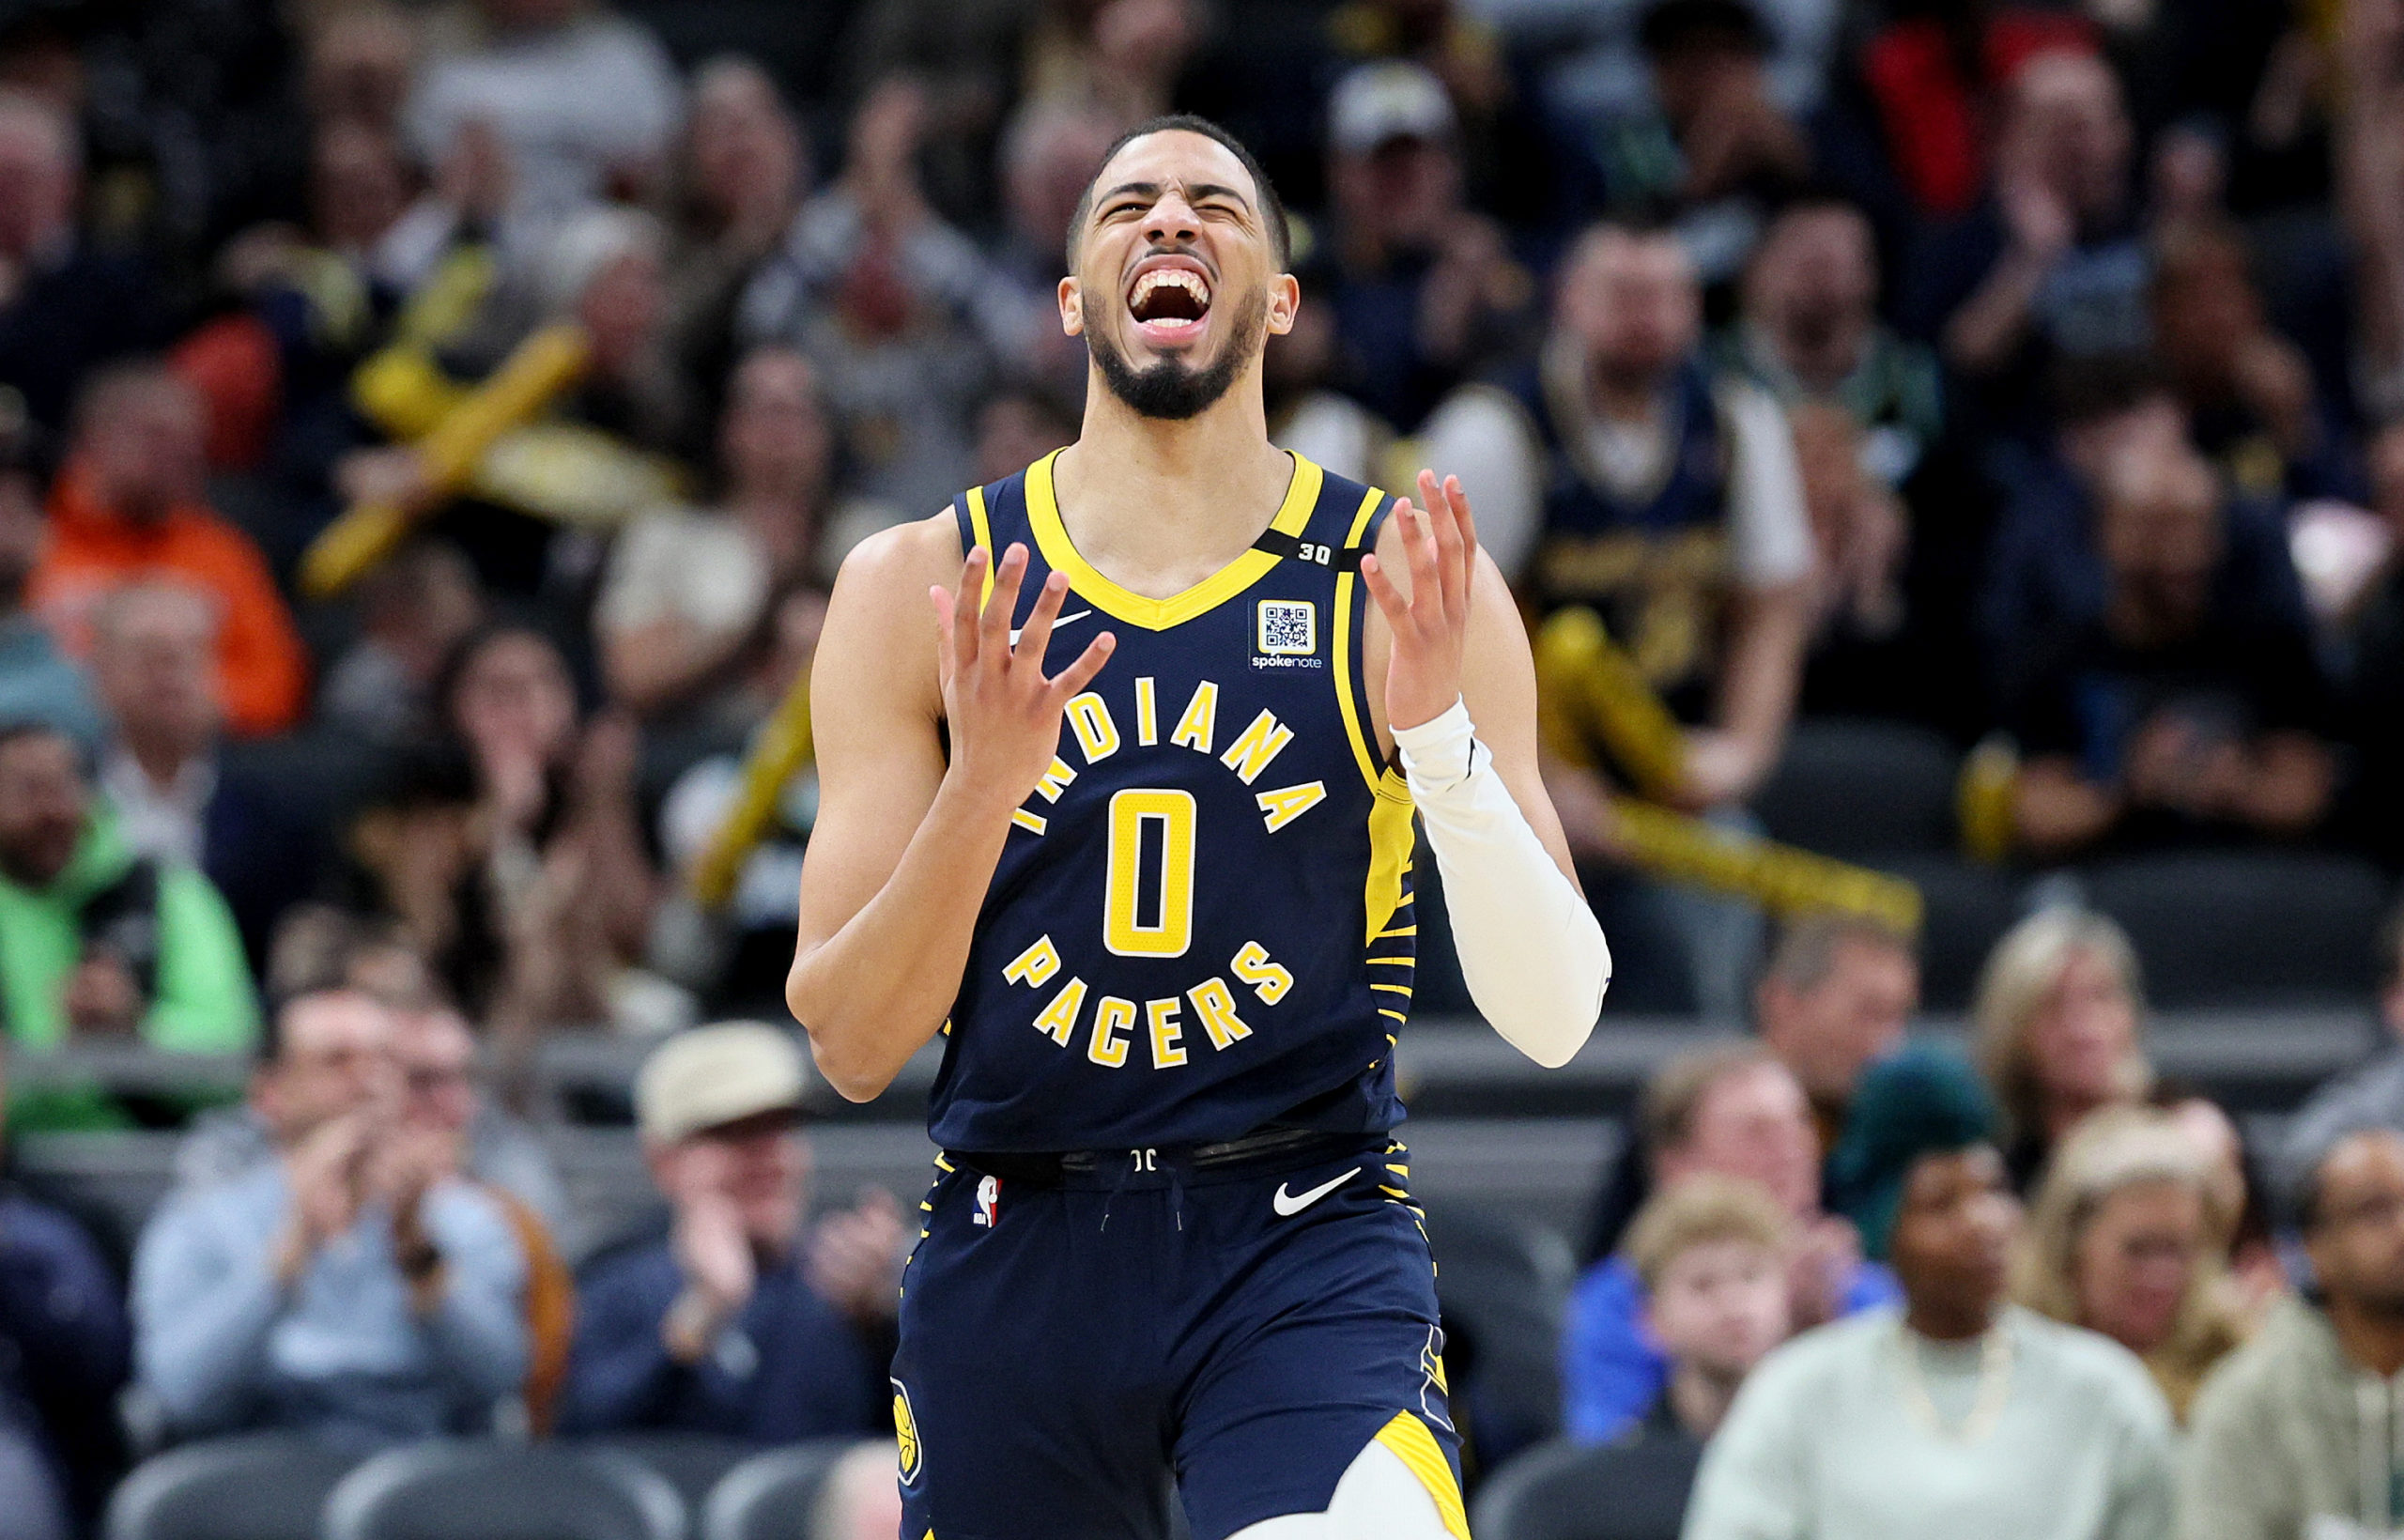 INDIANAPOLIS, INDIANA - FEBRUARY 06: Tyrese Haliburton #0 of the Indiana Pacers celebrates in the second half of the 132-129 win over the Houston Rockets at Gainbridge Fieldhouse on February 06, 2024 in Indianapolis, Indiana. Andy Lyons/Getty Images